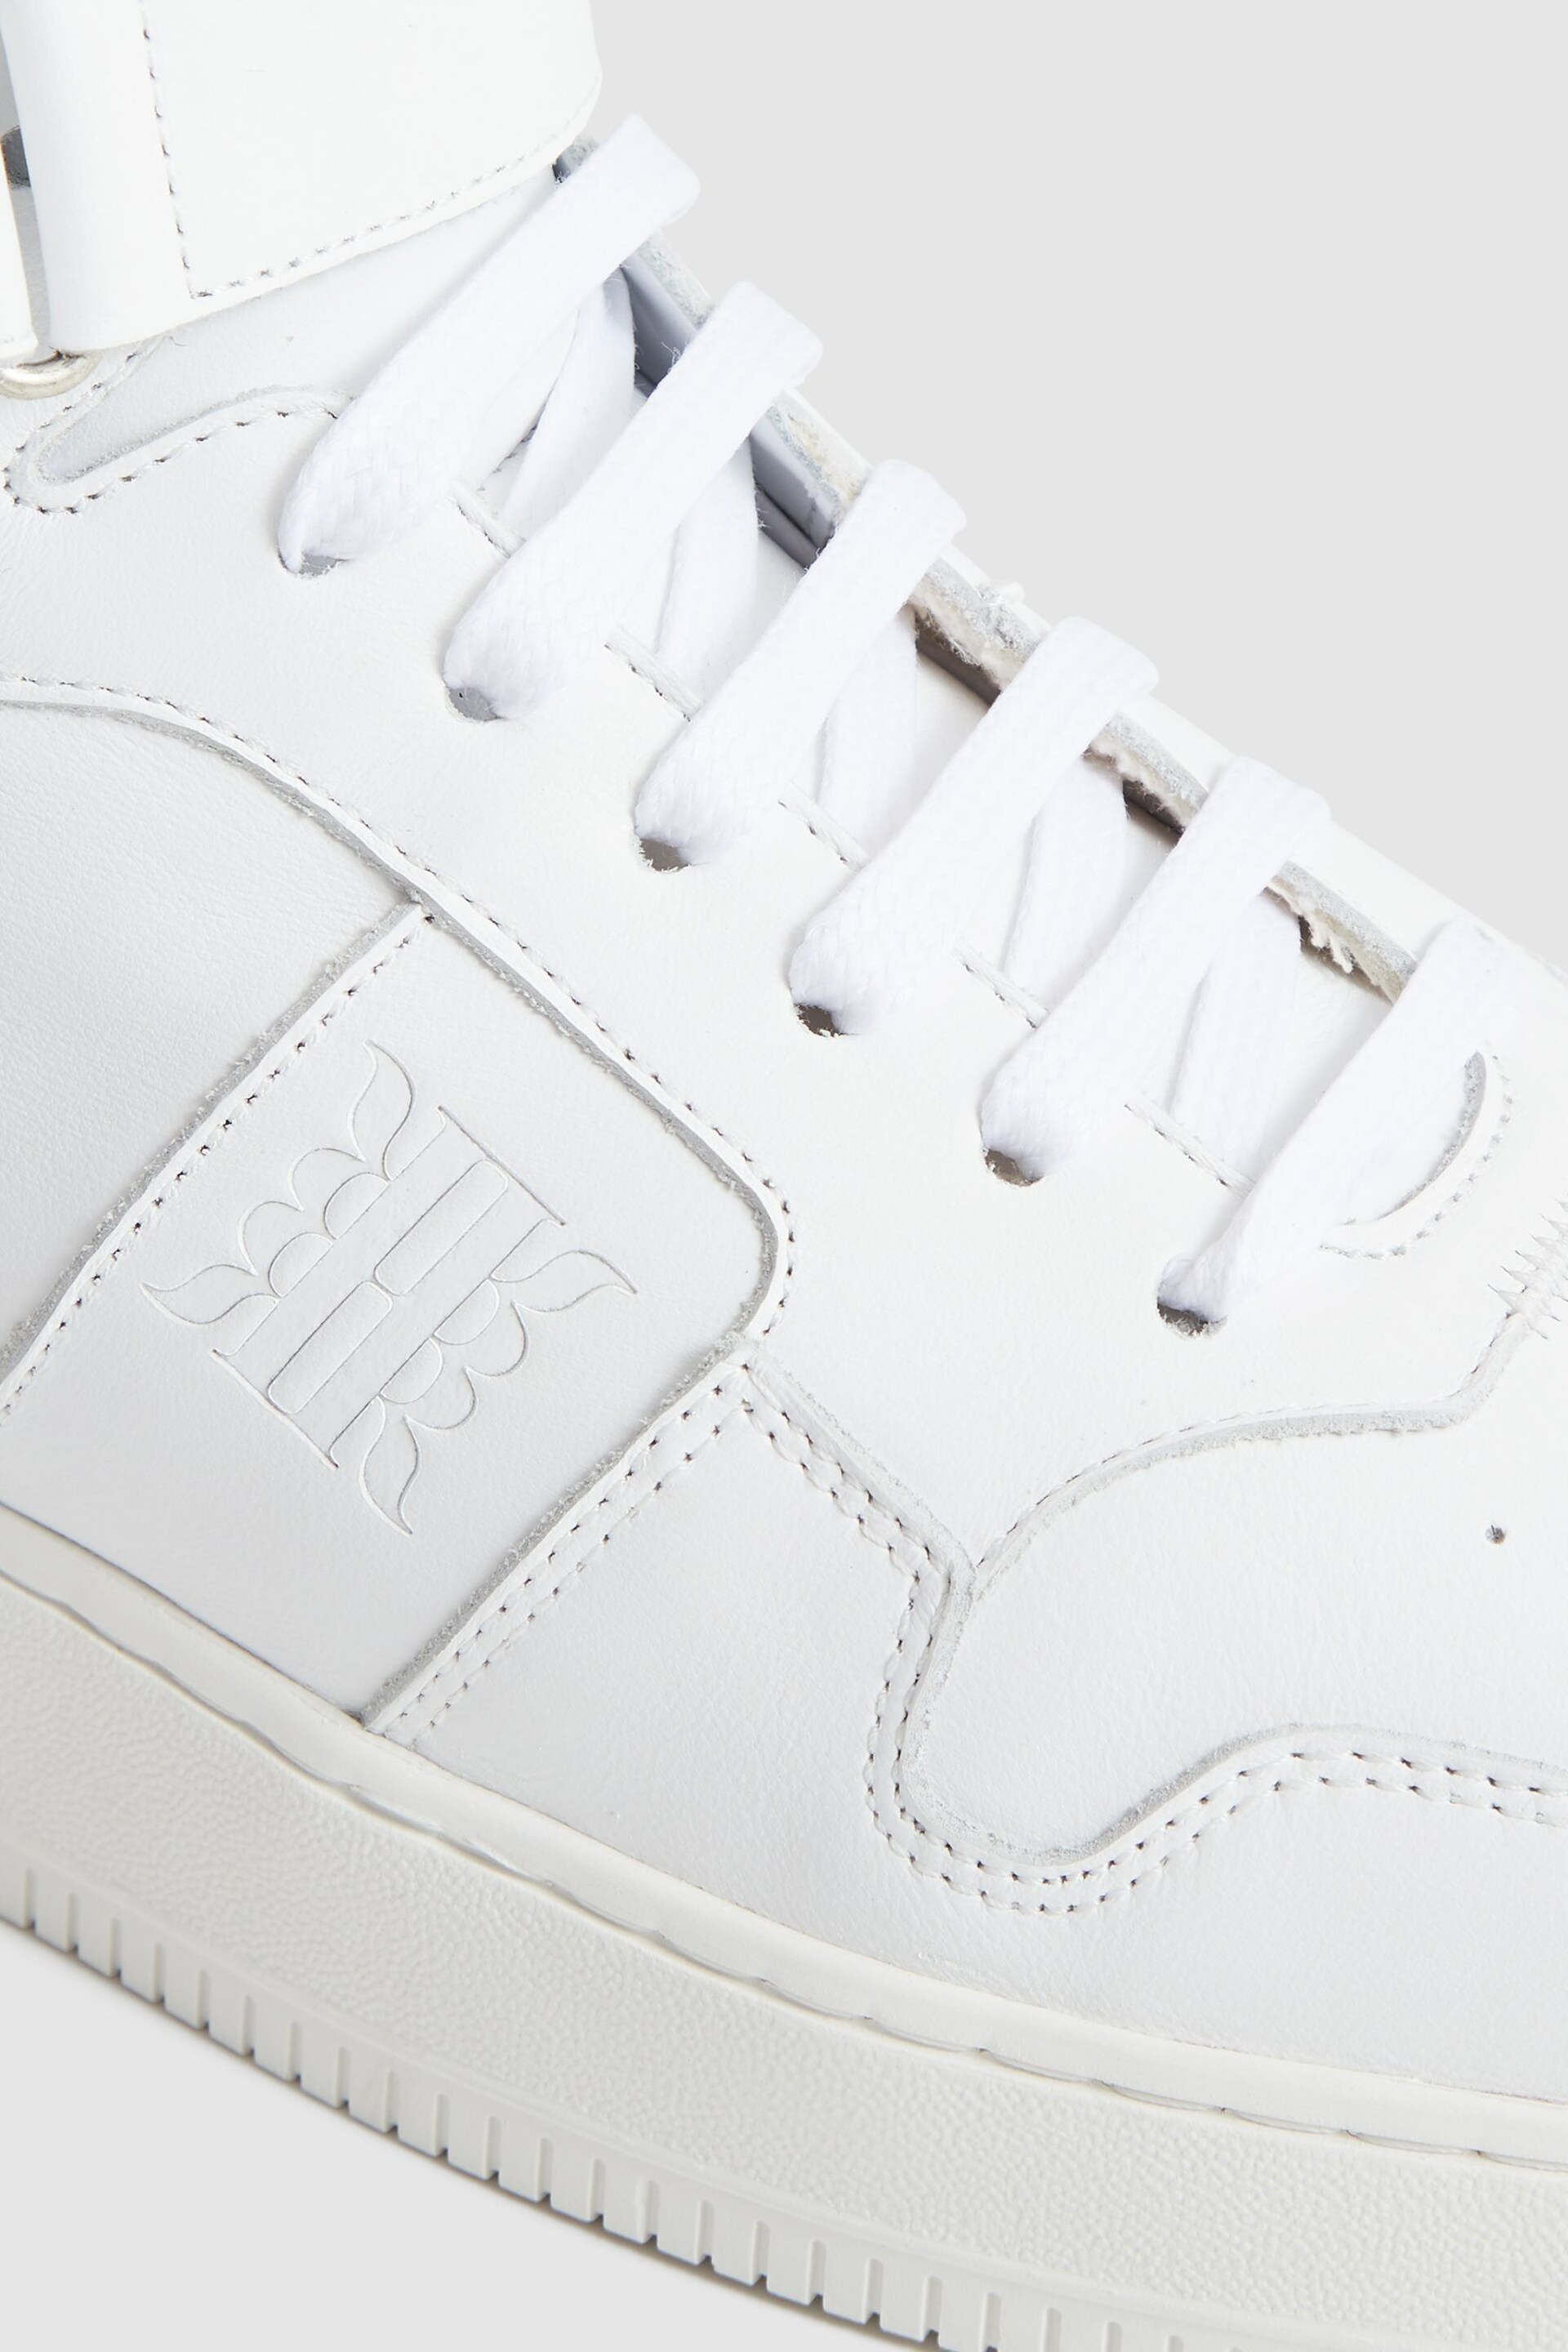 Reiss White Aira High Top Leather Trainers - Image 7 of 7